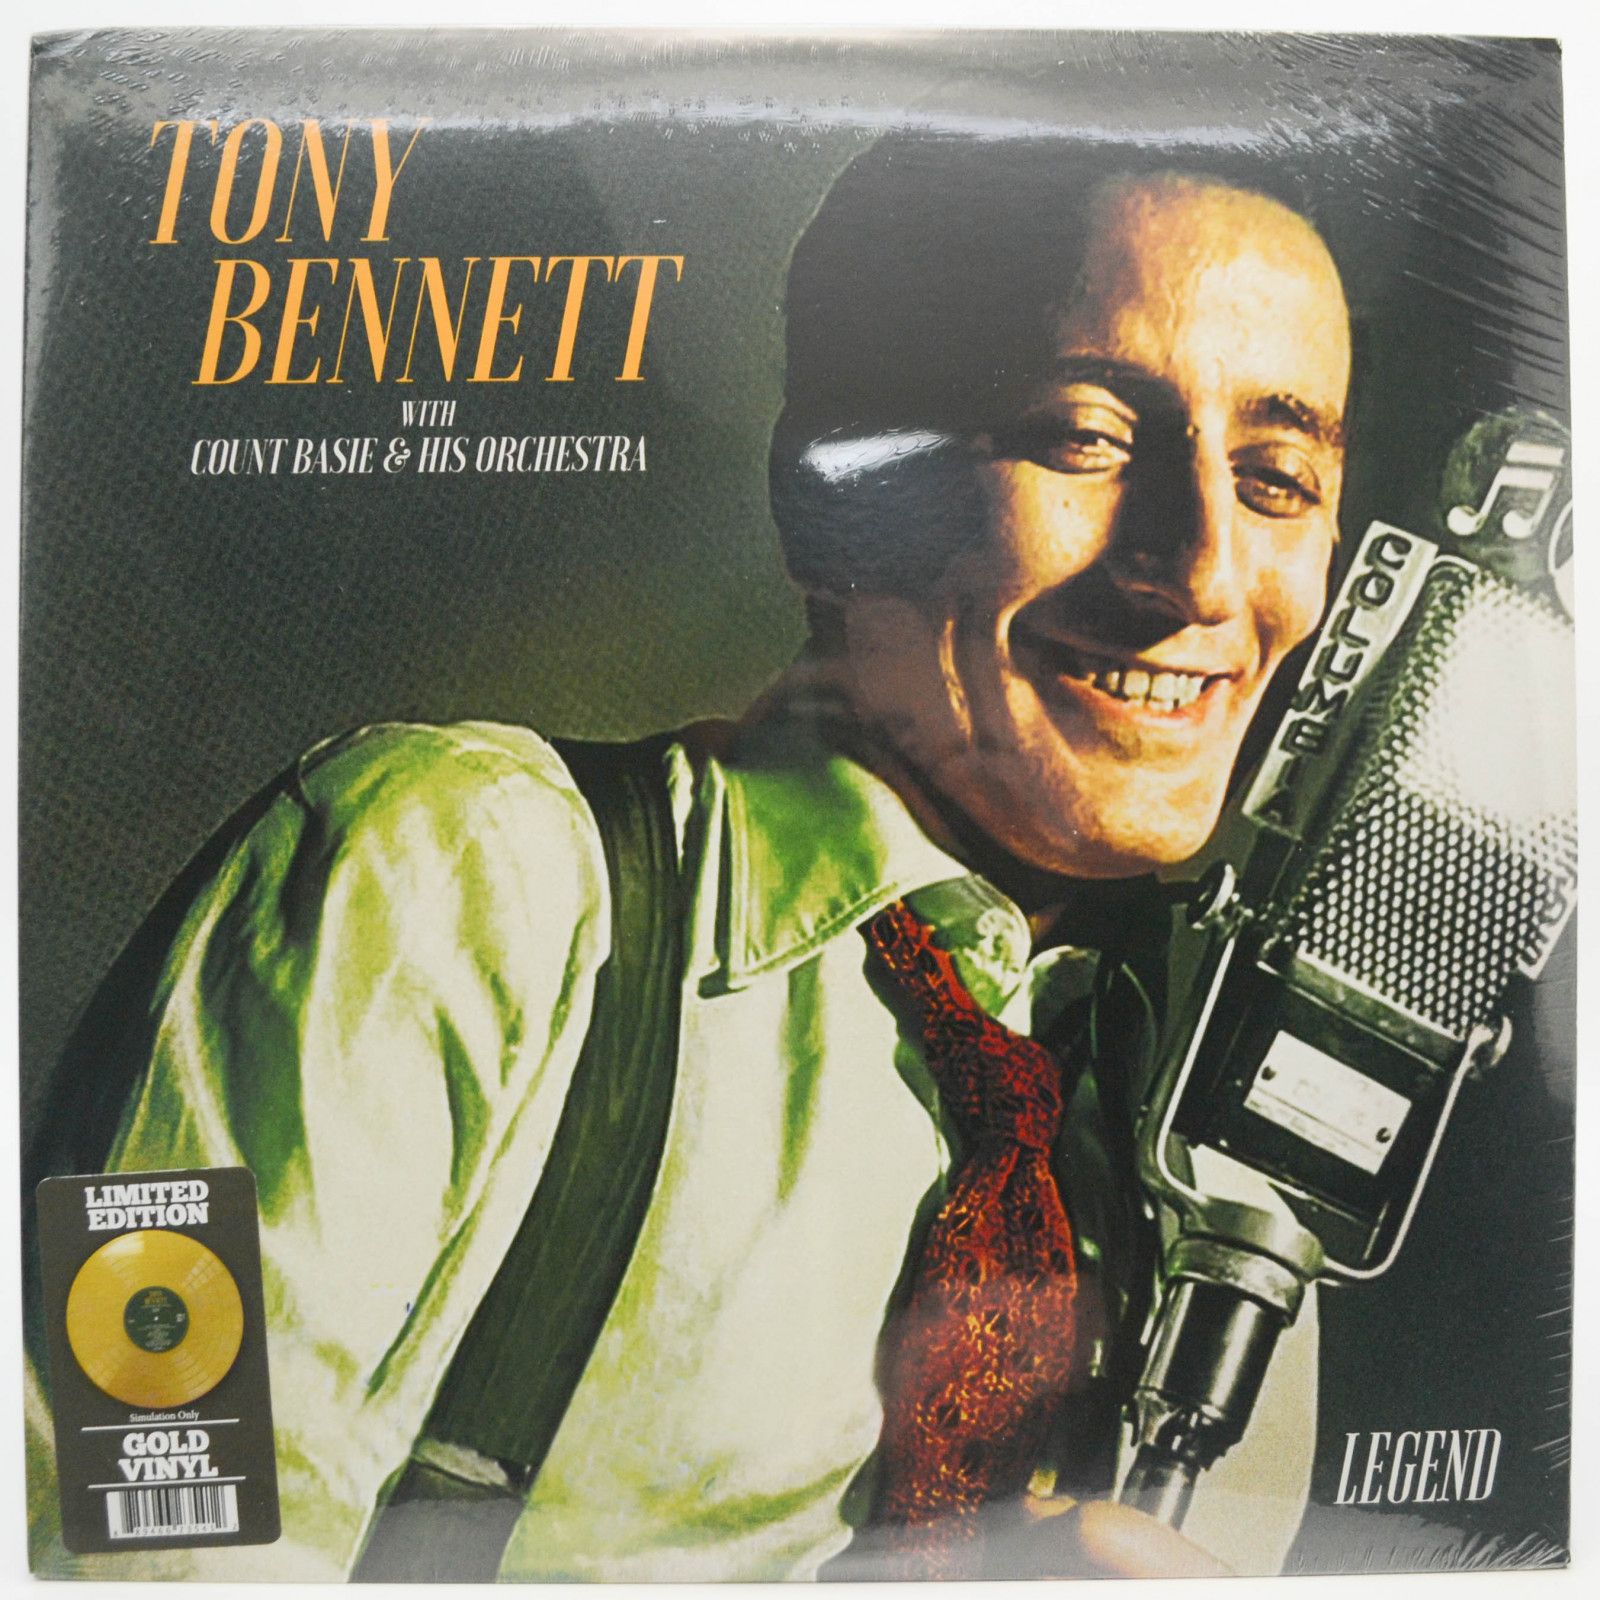 Tony Bennett with Count Basie & His Orchestra — Legend (USA), 1959